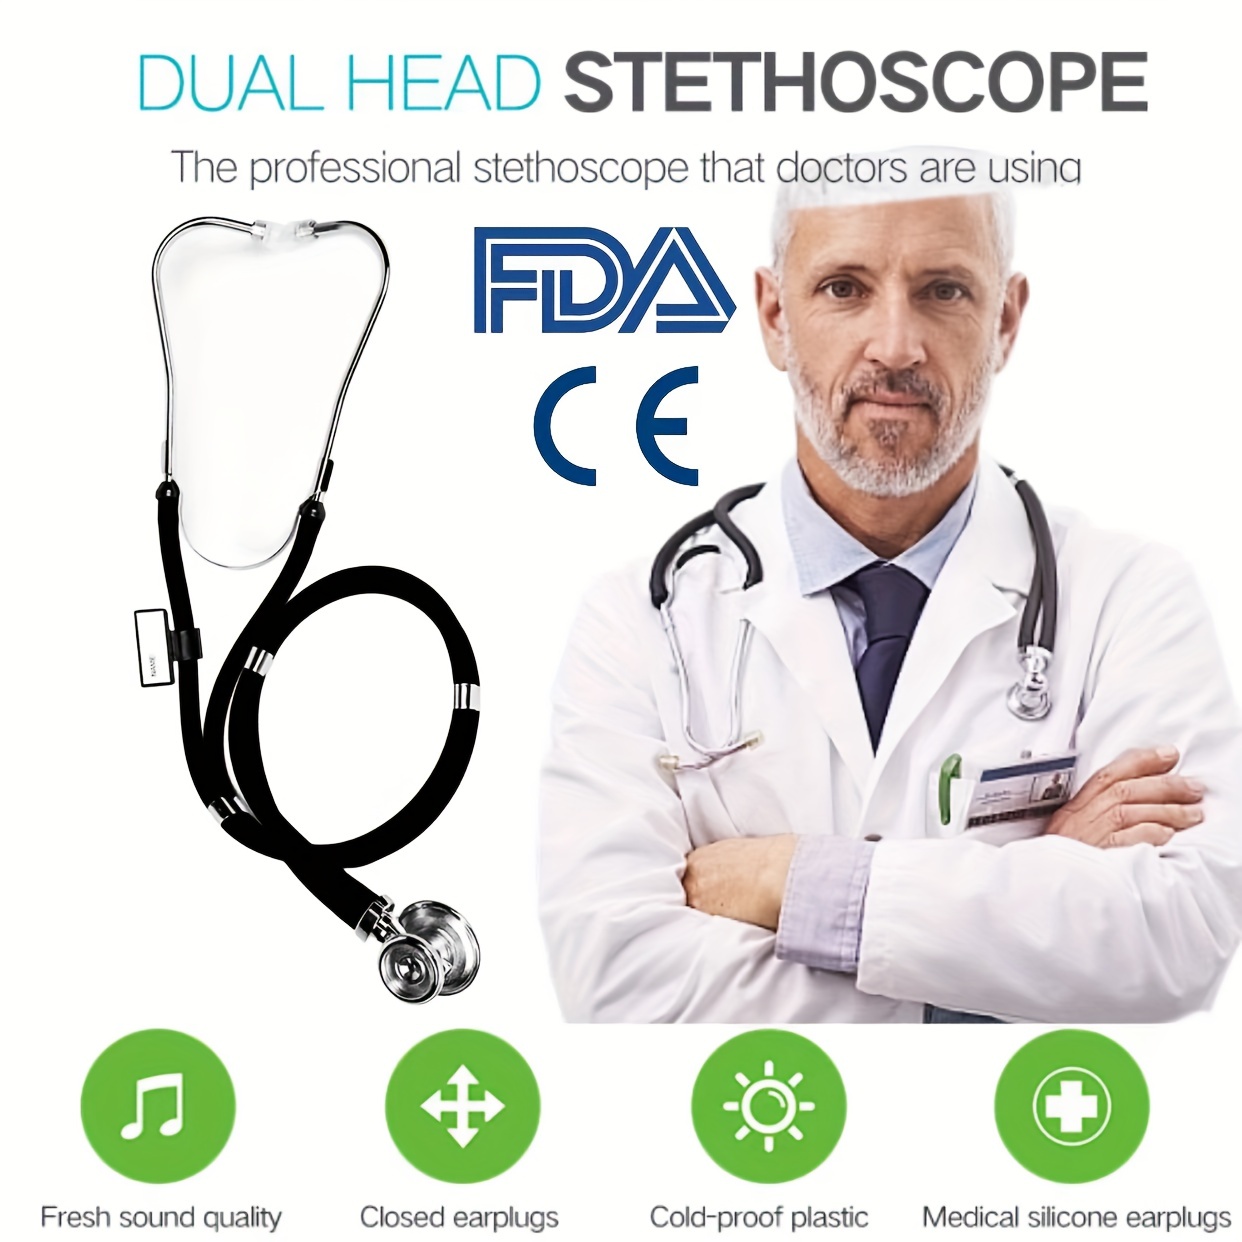 Greater Goods Premium Dual-Head Stethoscope - Affordable Clinical Grade Option for Doctors Nurses Students or in The First Aid Kit for Home